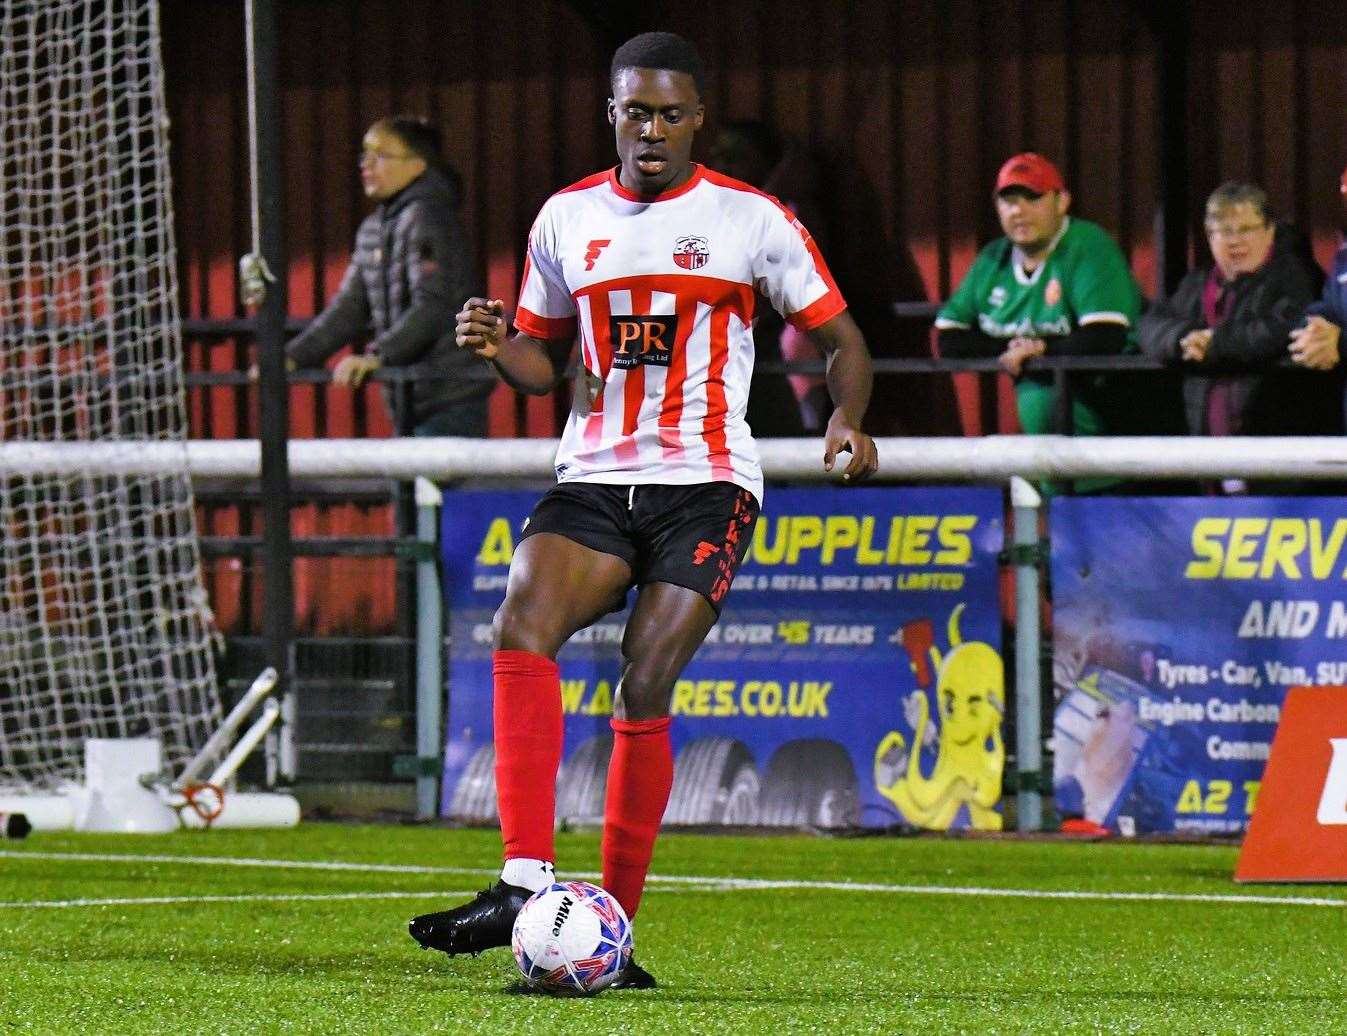 Defender Lekan Majoyegbe on the ball for Sheppey. Picture: Marc Richards